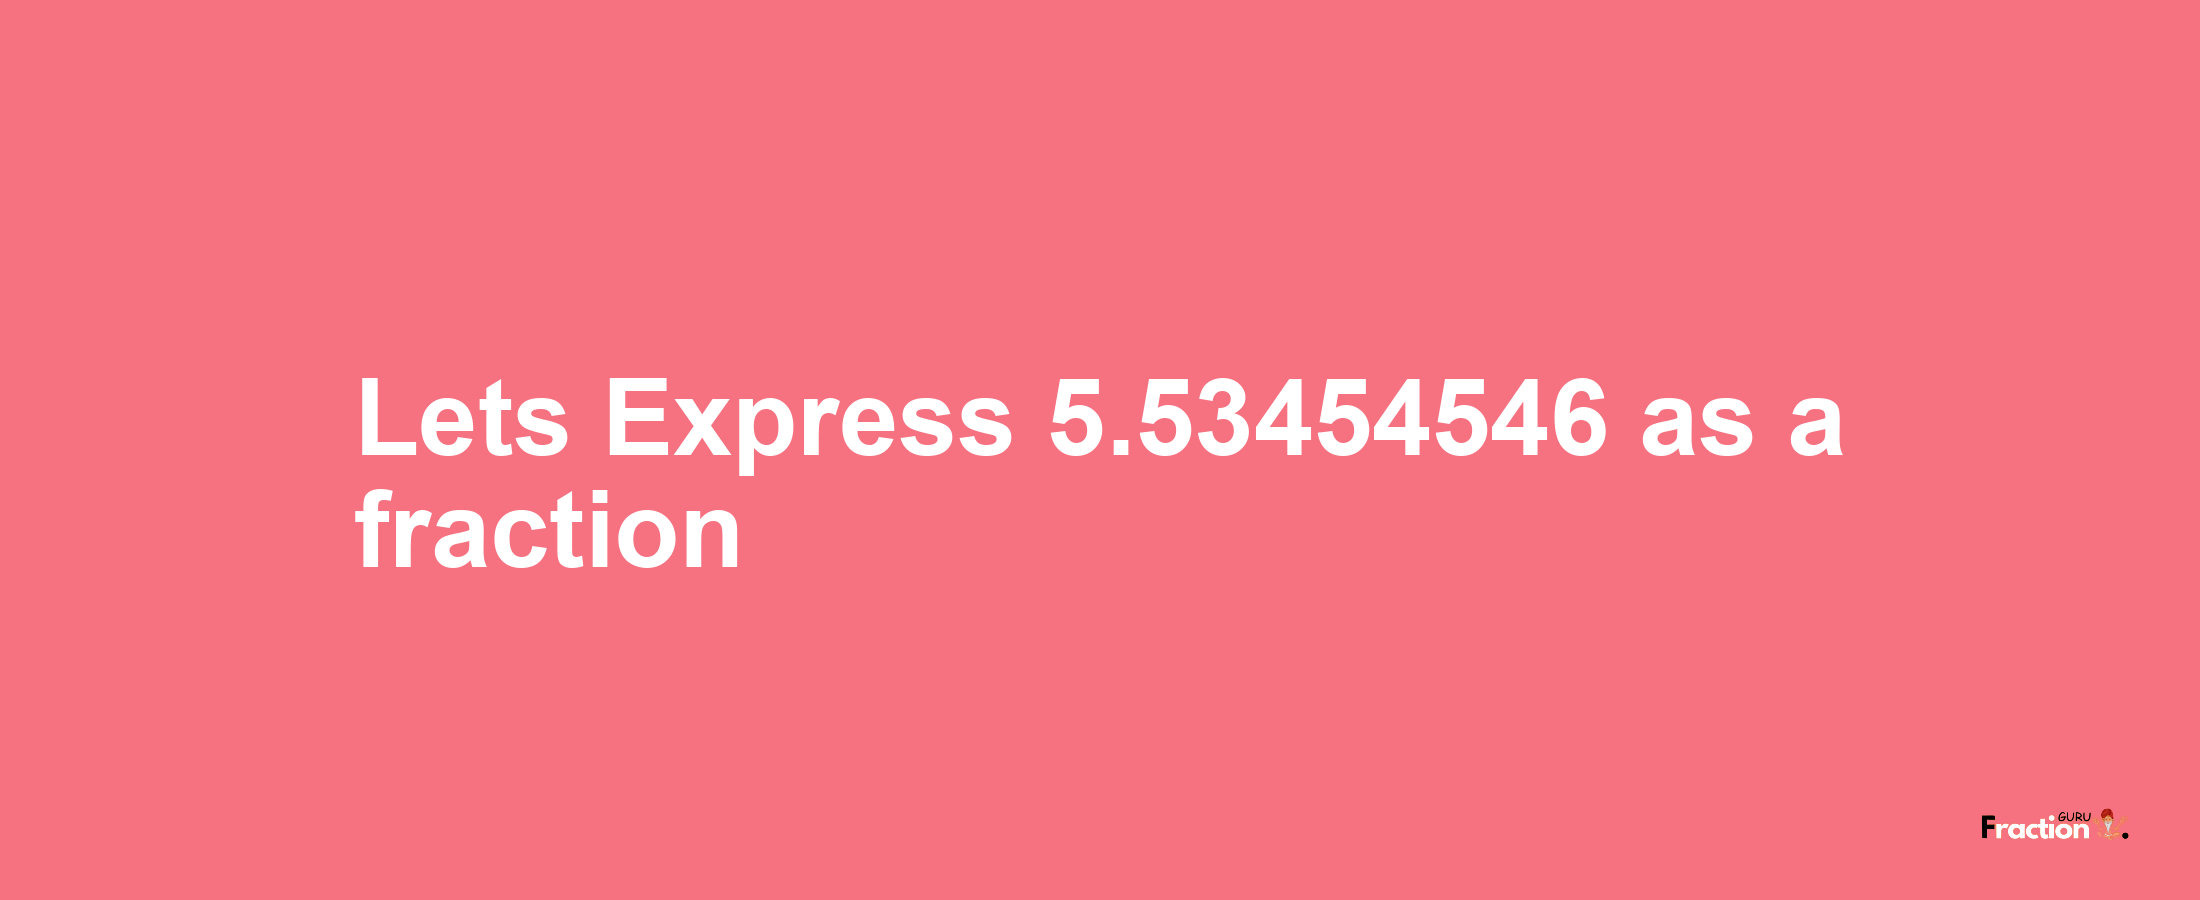 Lets Express 5.53454546 as afraction